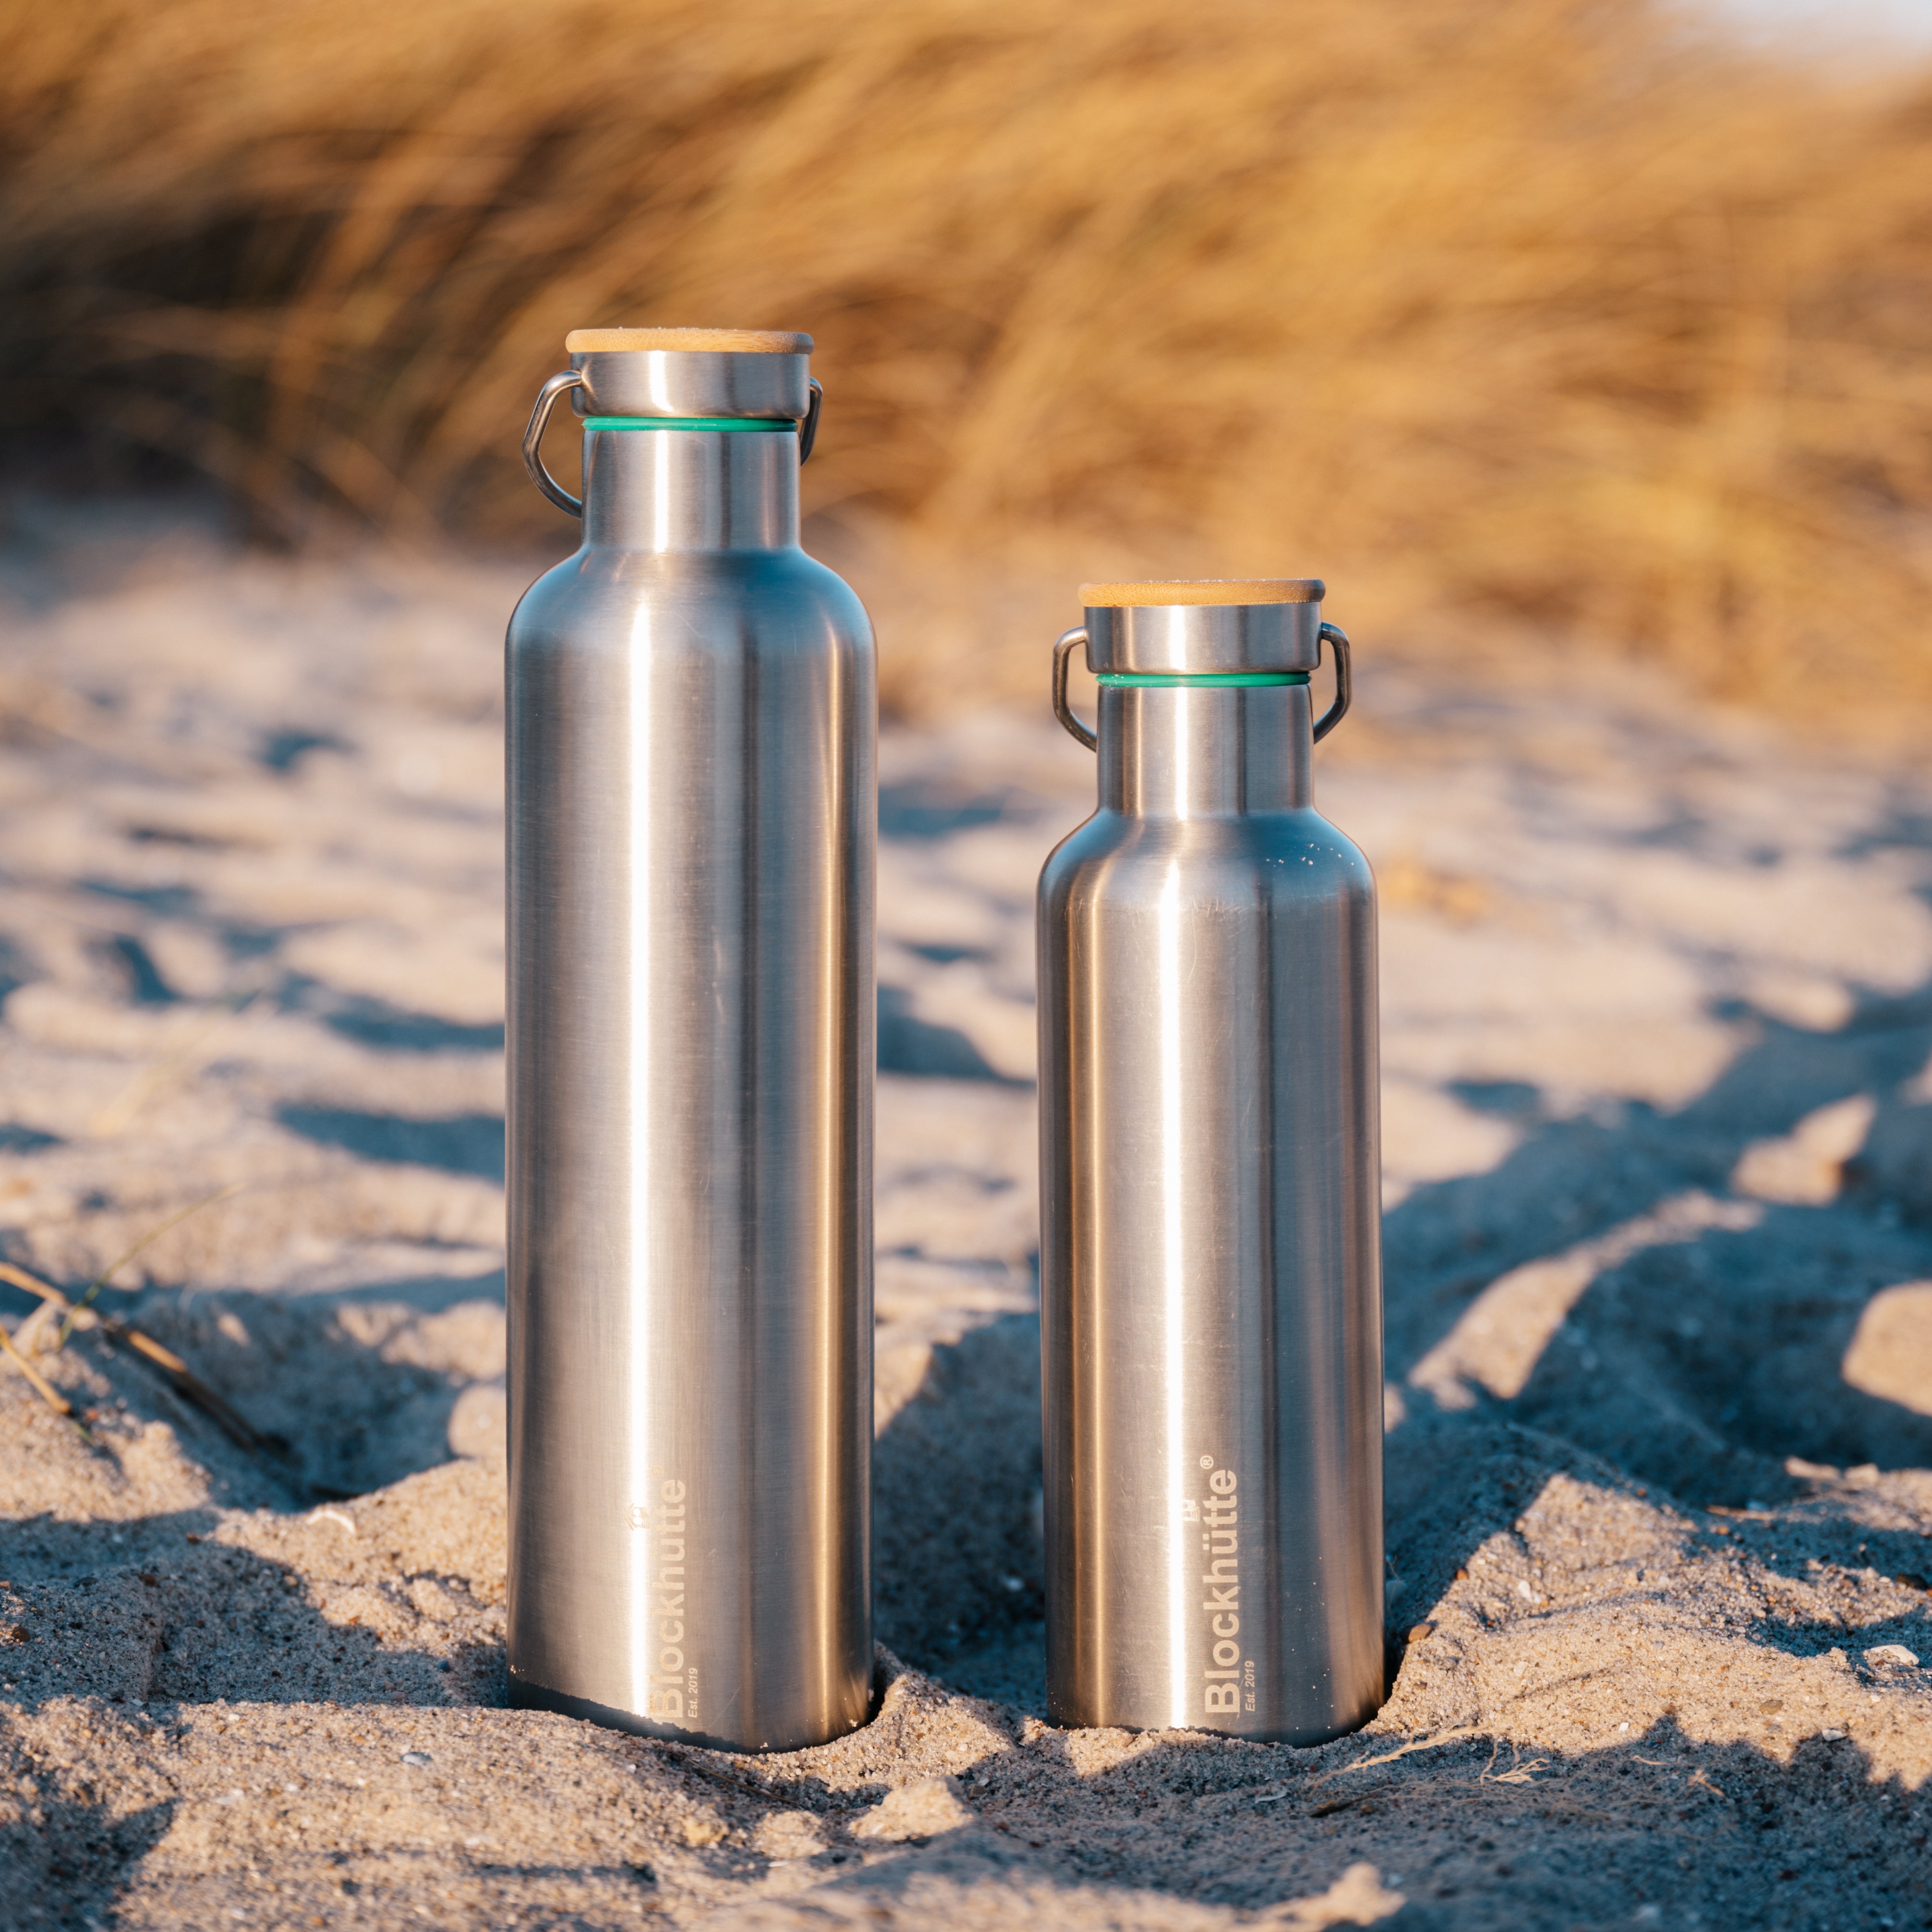 Blockhuette stianless steel water bottles in comparison on the beach